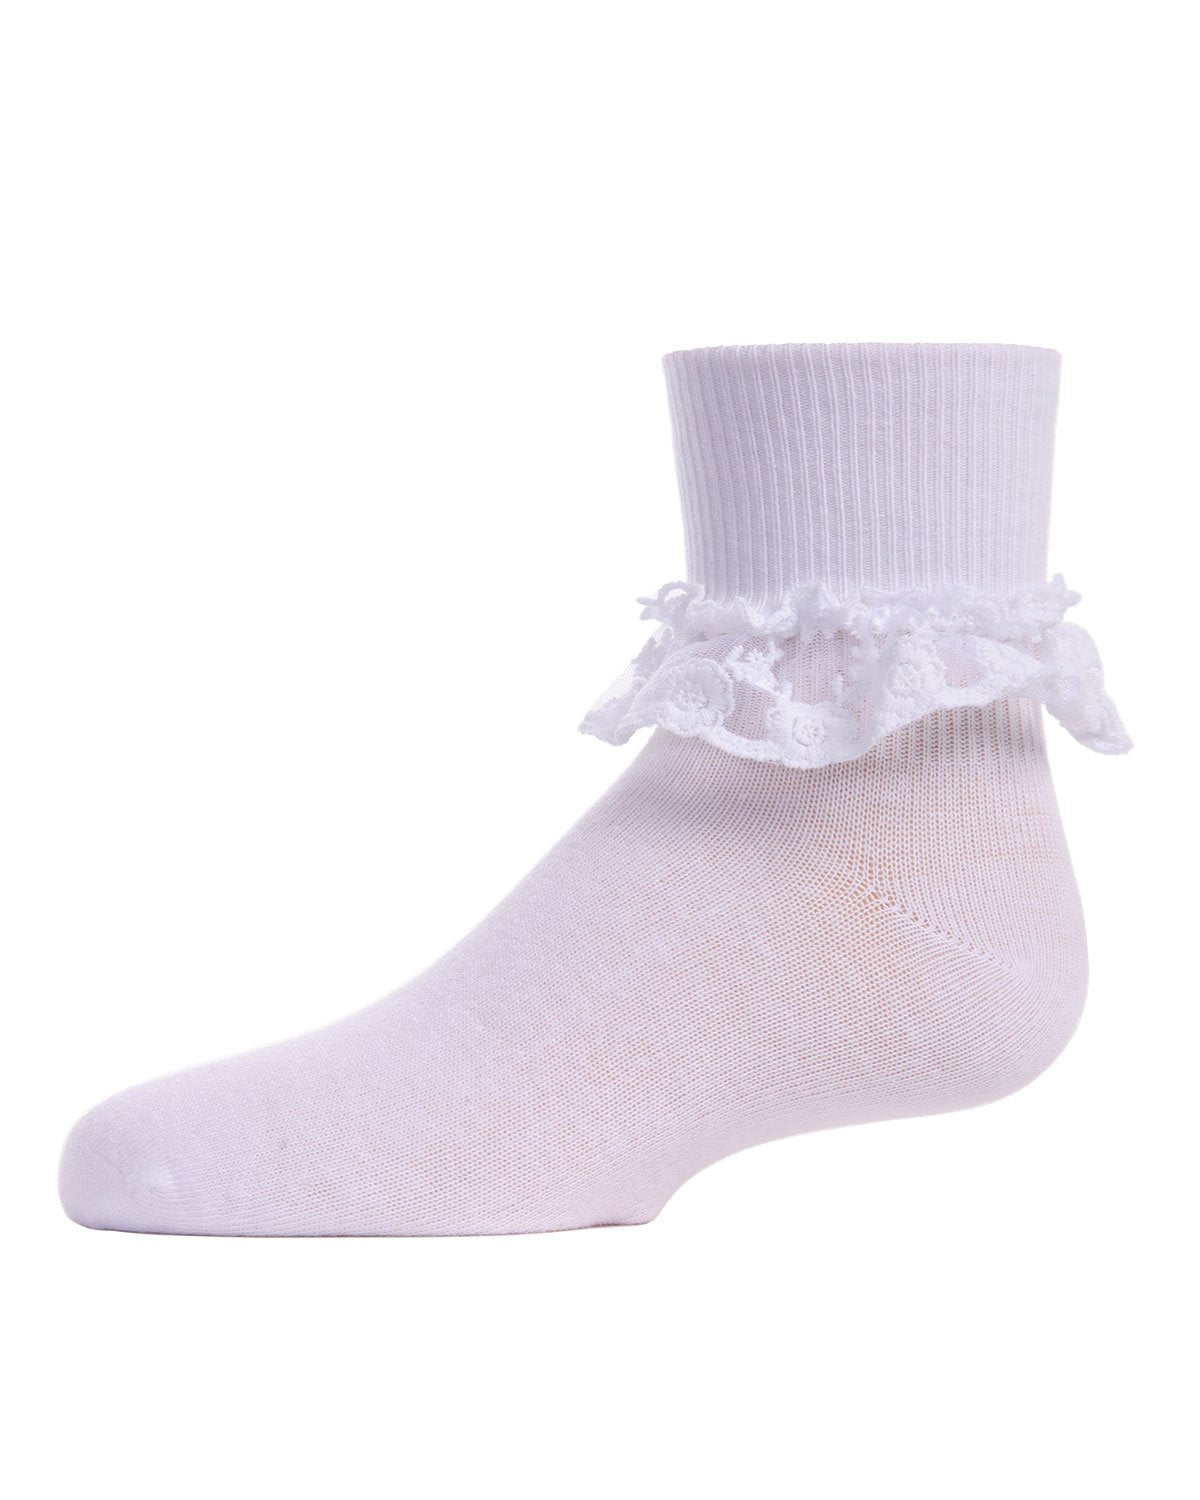 Double Dare Girls Dual-Layer Lace Cotton Blend Anklet Socks